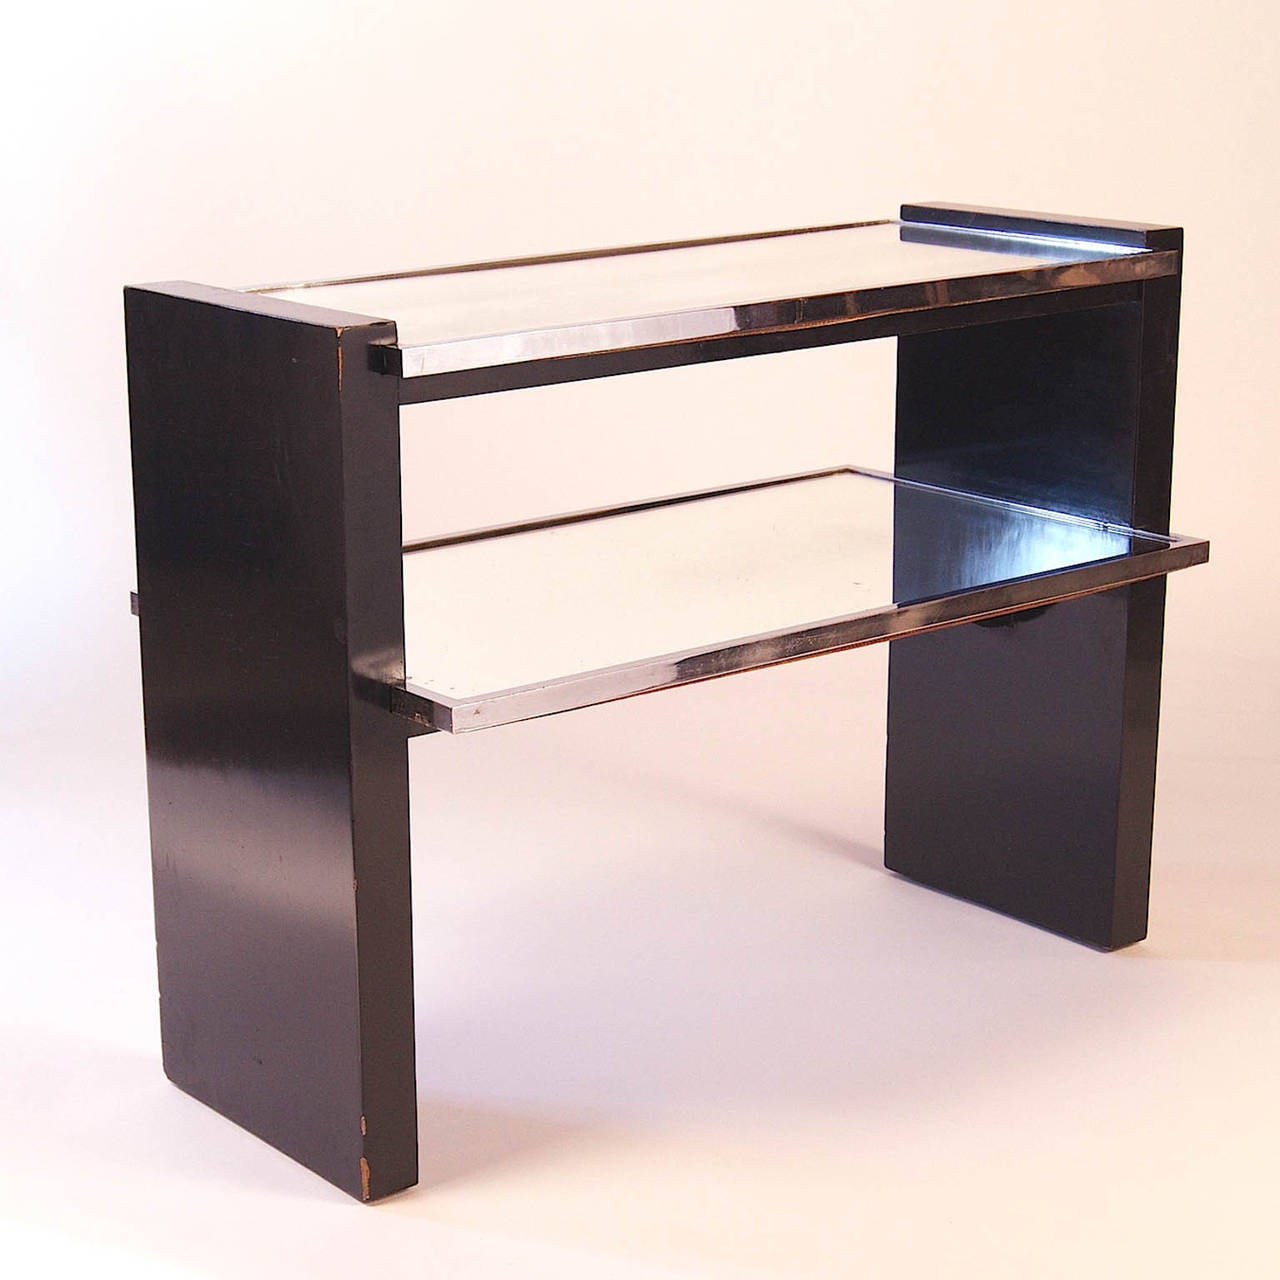 Black lacquer, steel and mirrored side table by Jacques Adnet, France, 1950s.